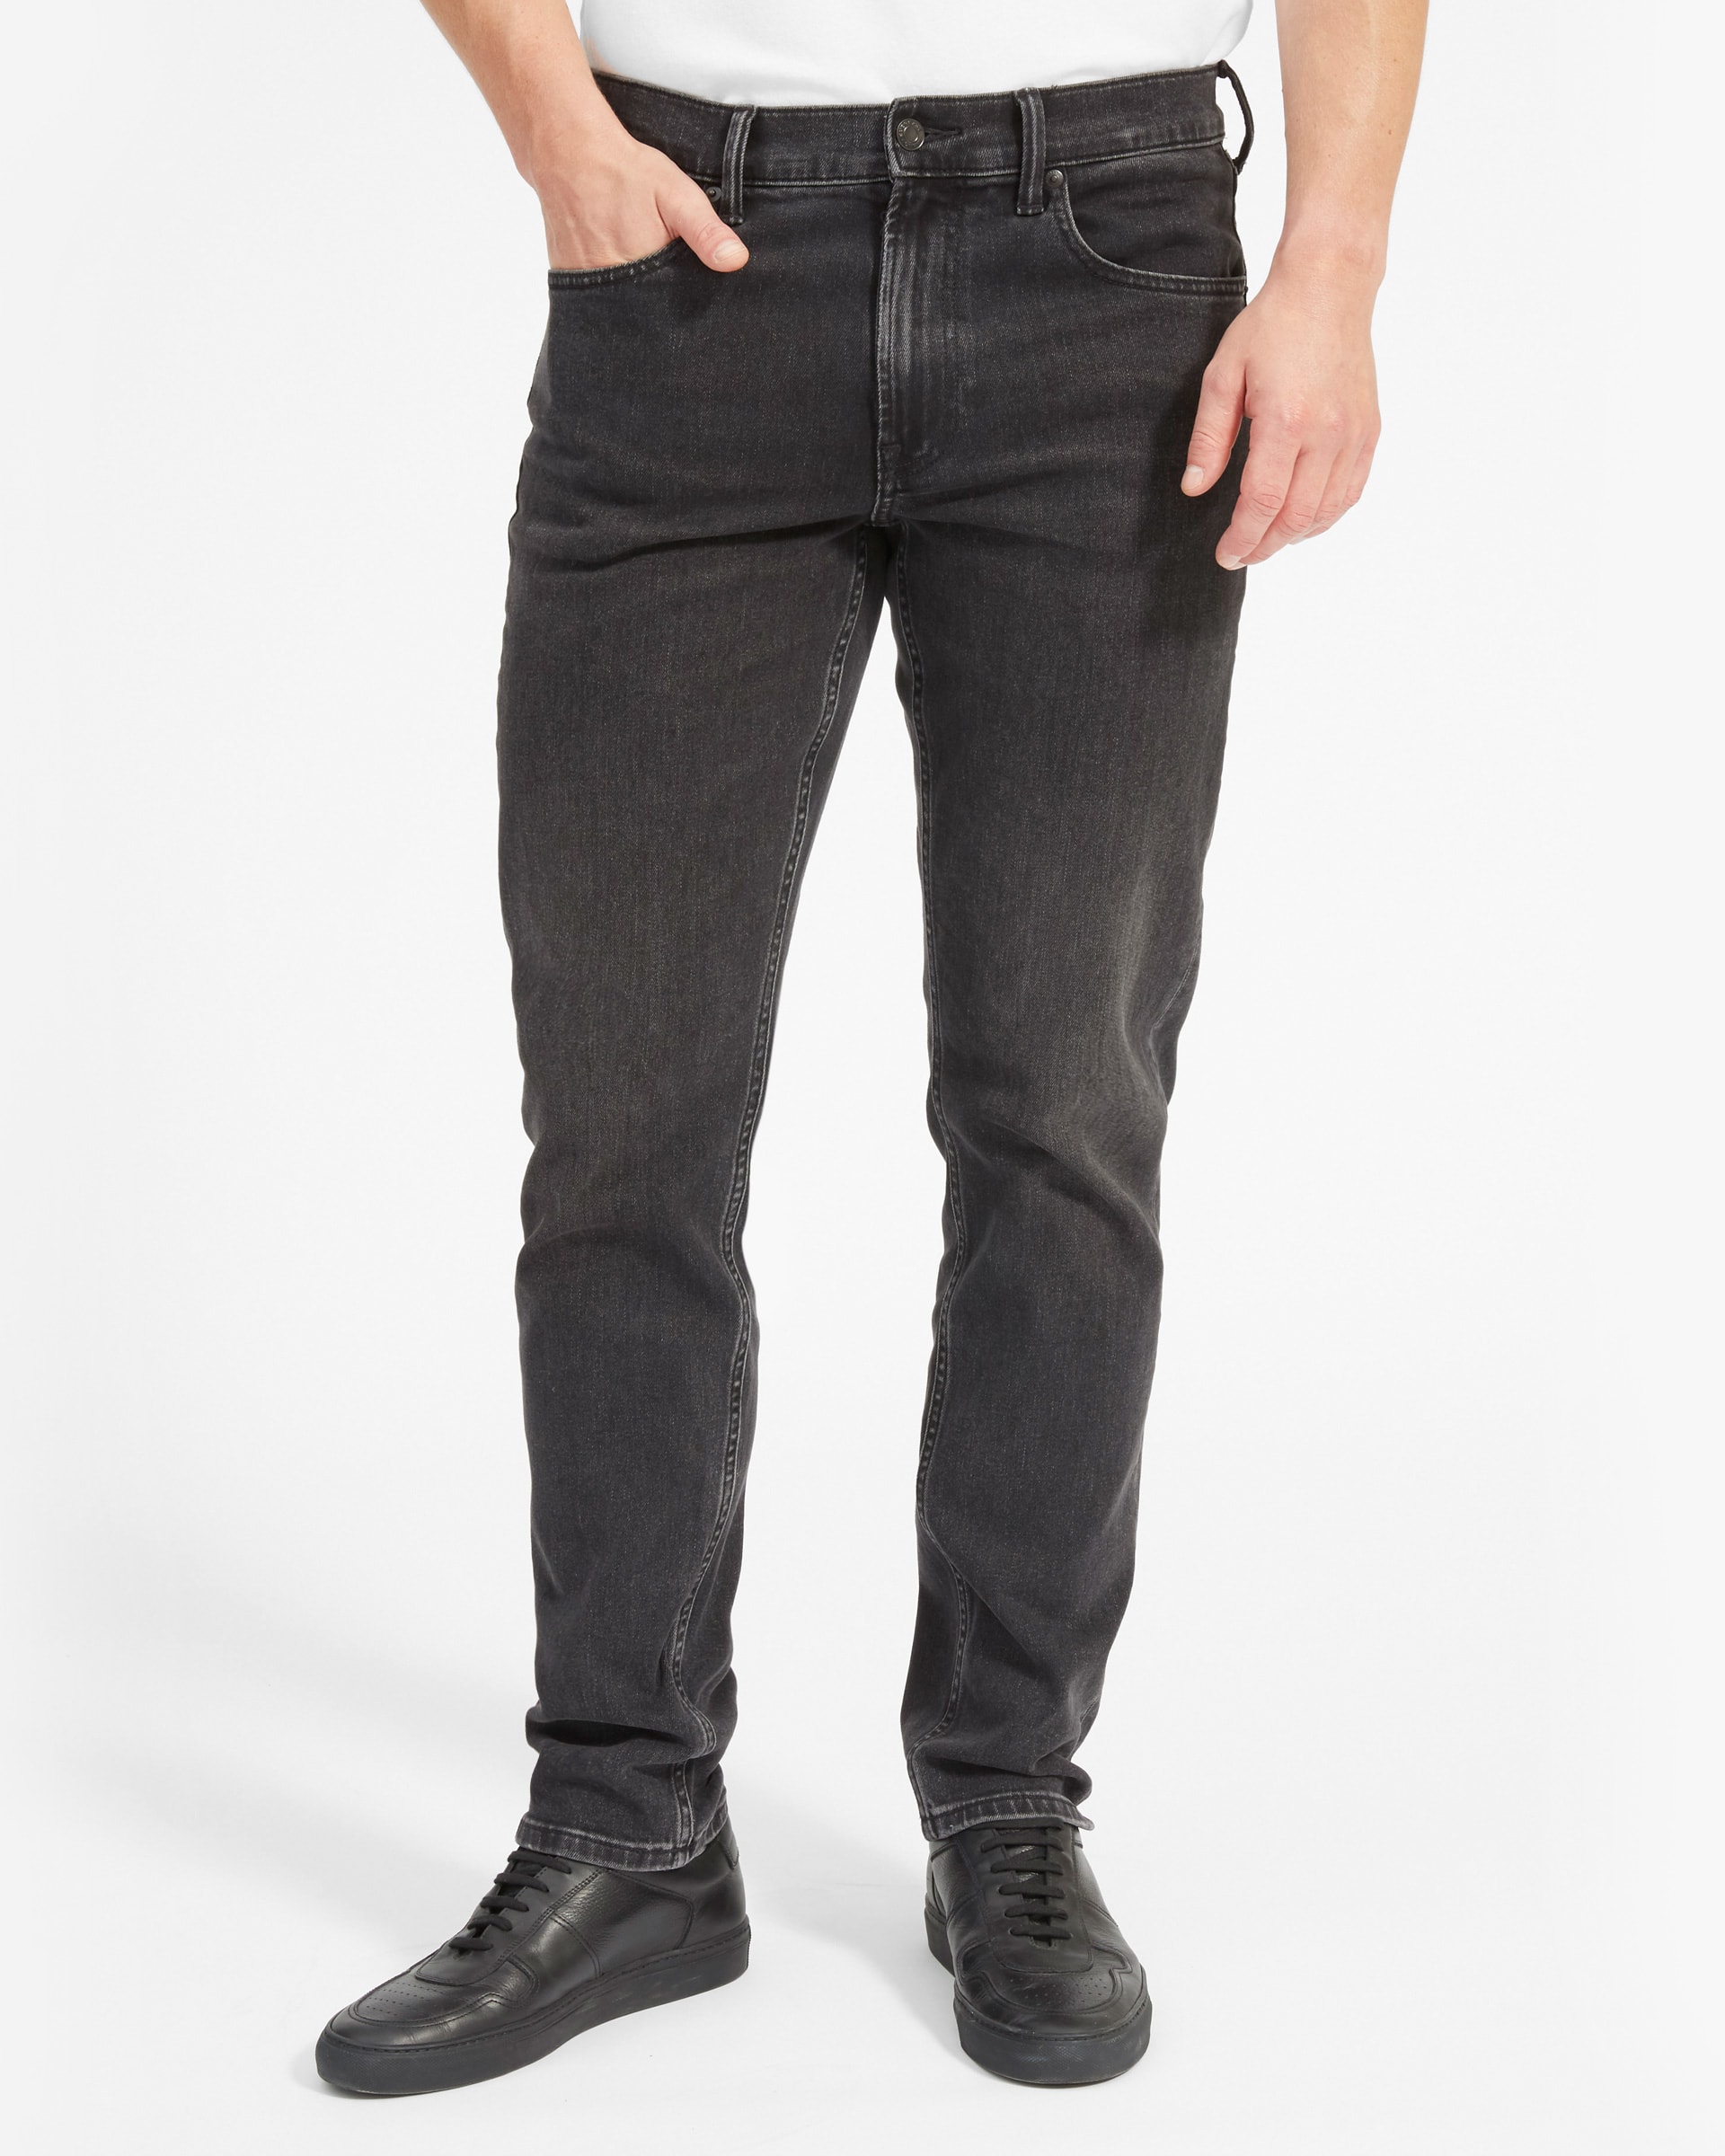 The Athletic Fit Jean Washed Black – Everlane